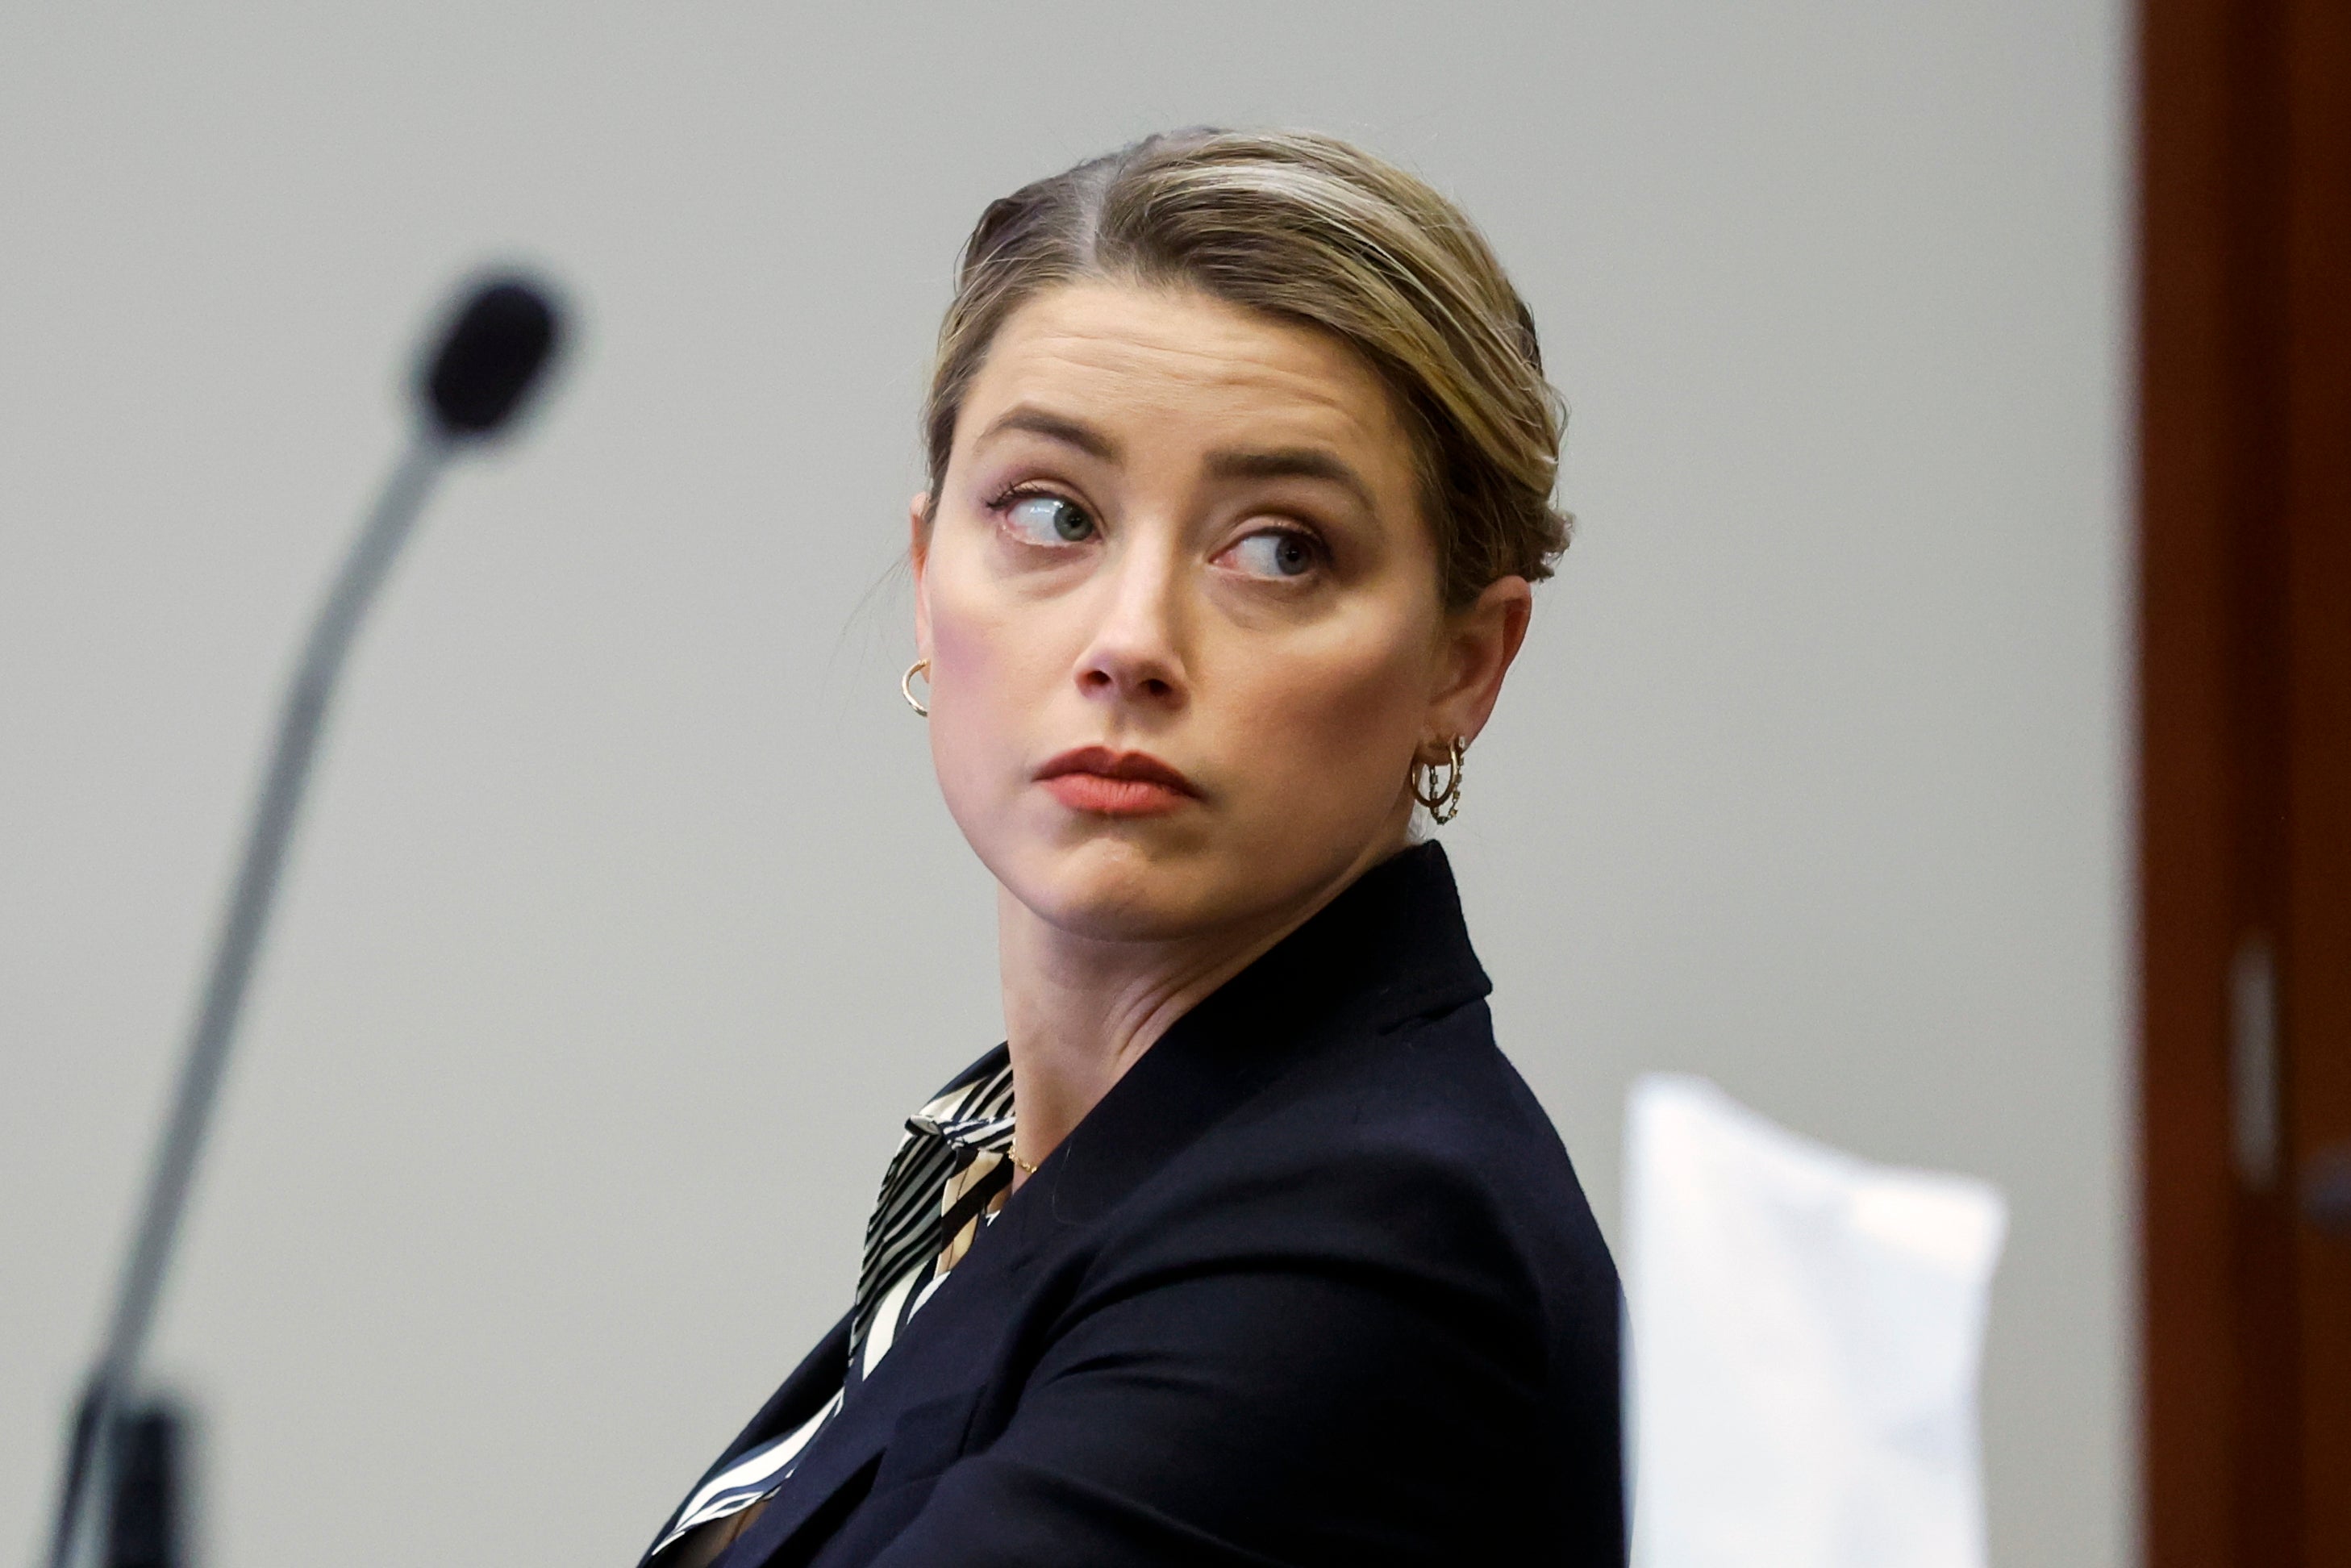 Actor Amber Heard listens in the courtroom at the Fairfax County Circuit Court in Fairfax, Va., Wednesday, April 27, 2022